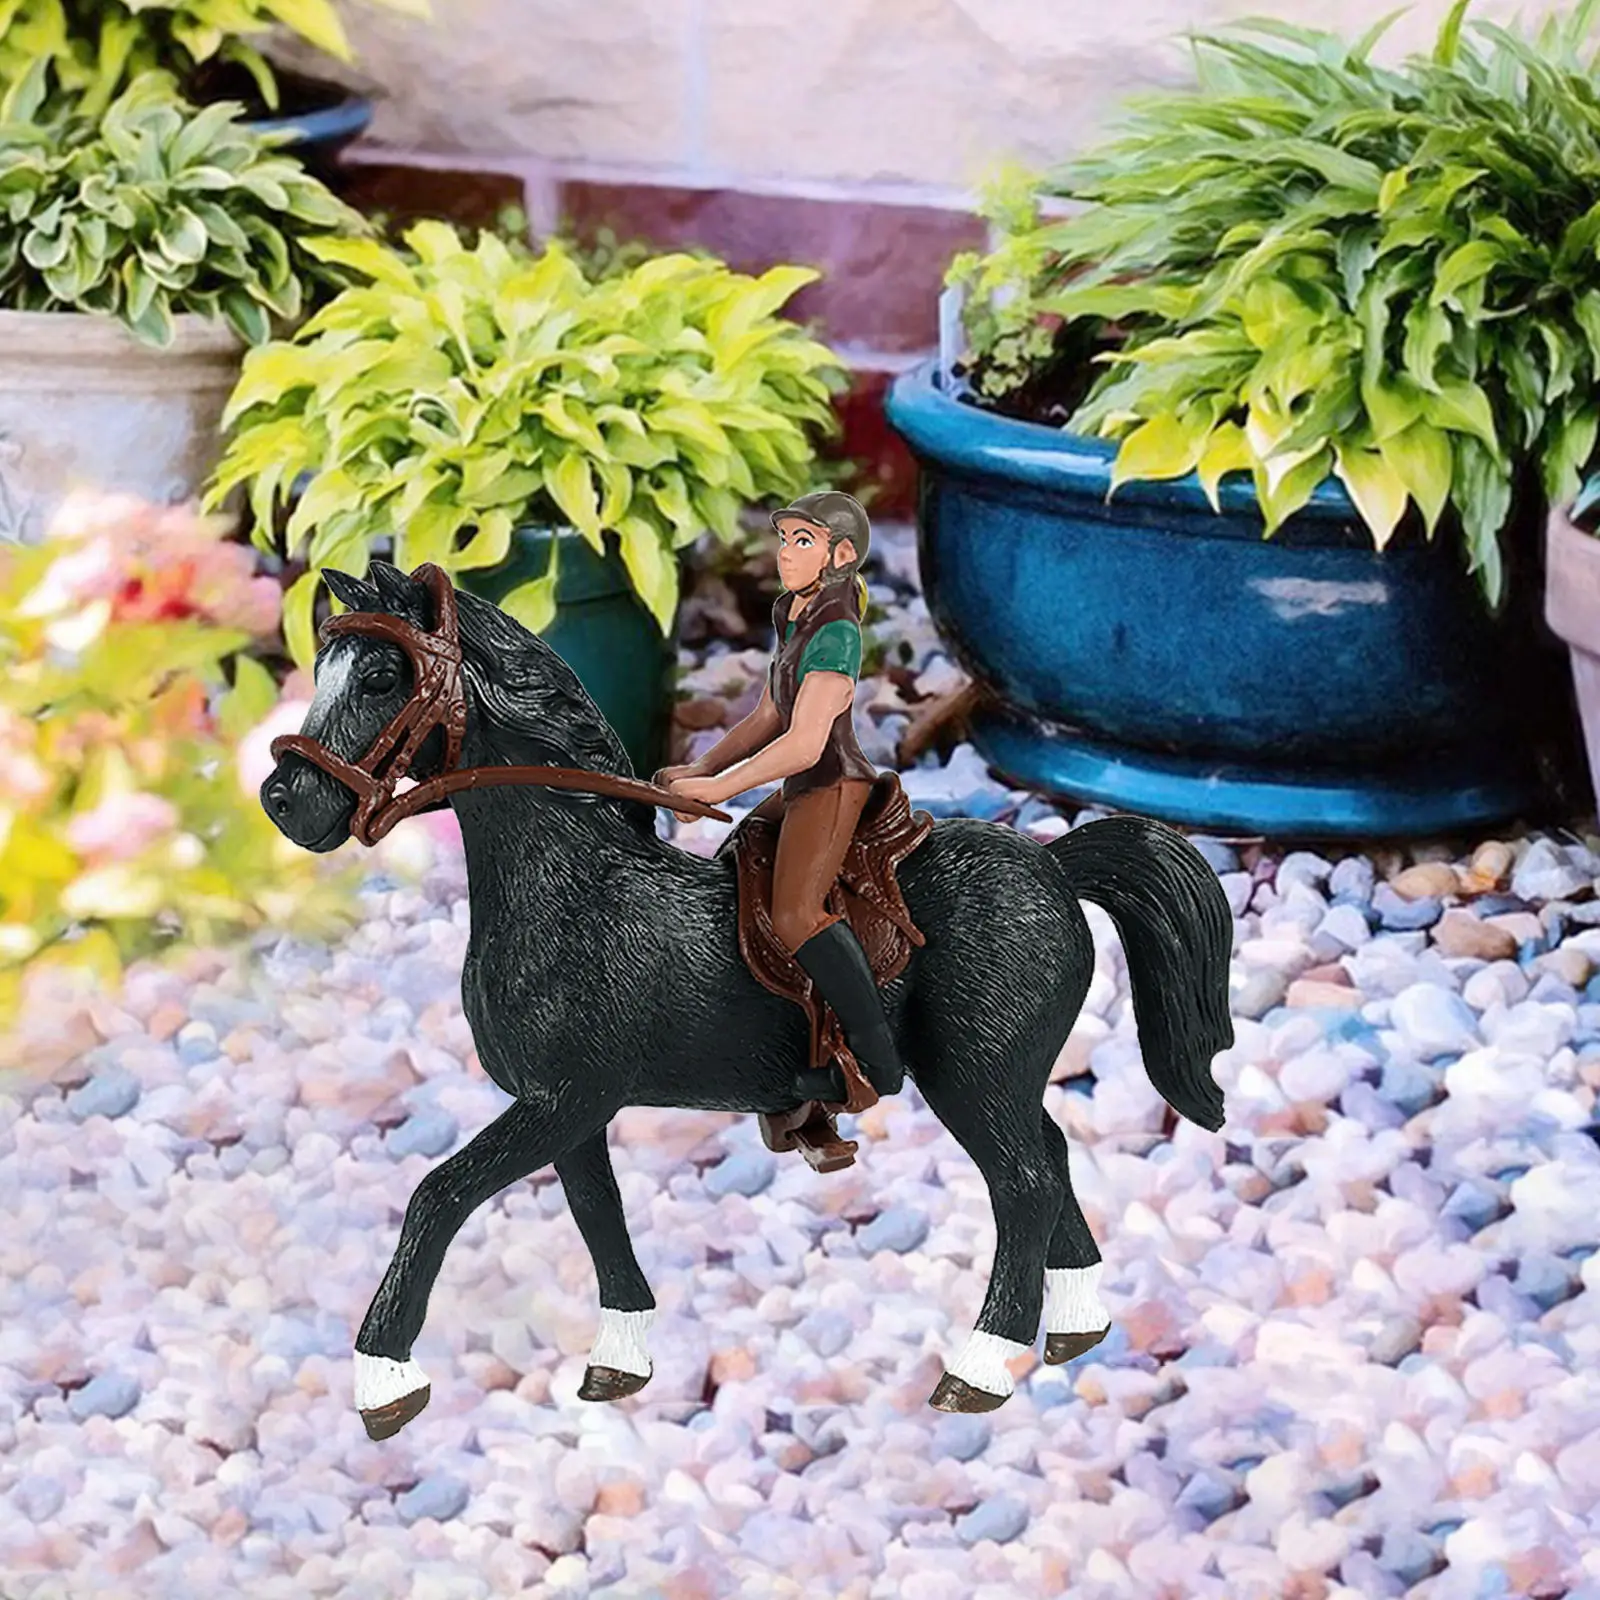 Horse with Rider Collection Model Figurine Mini Animal Figure for Children